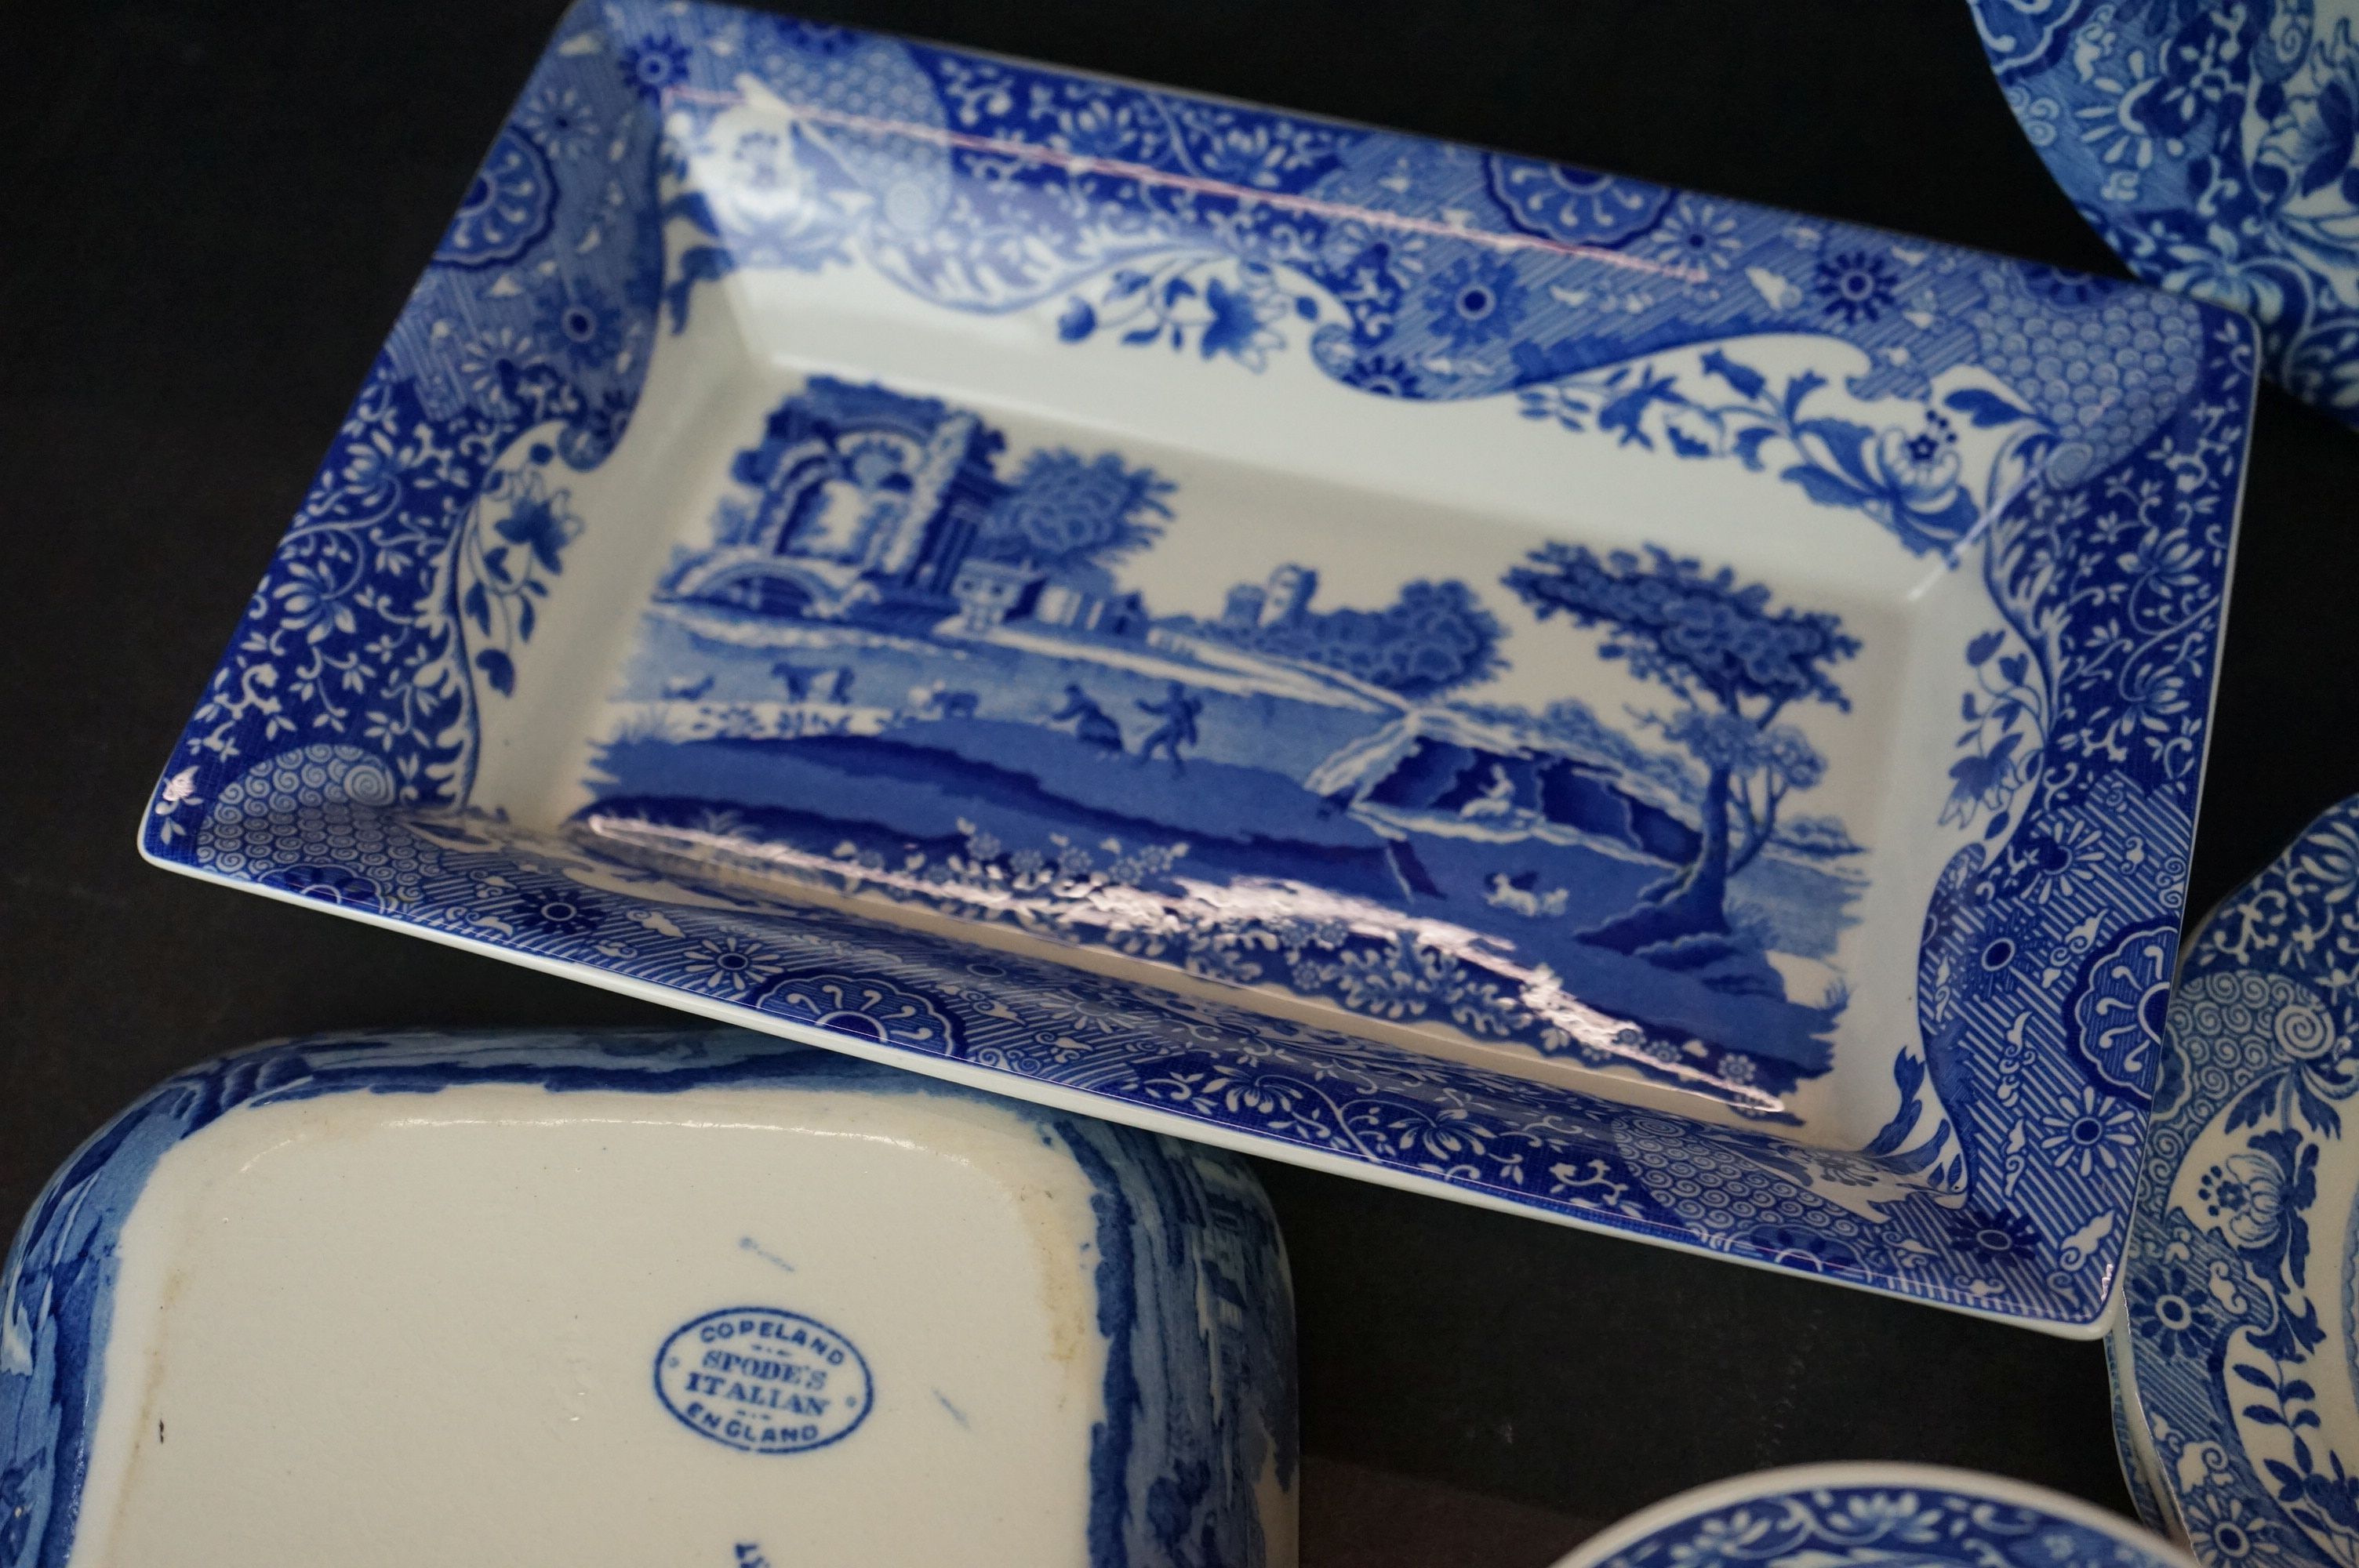 Collection of Spode Italian Blue and Ceramics including Bowl, Two Cups and Saucers, Two Tea Plates - Image 7 of 9